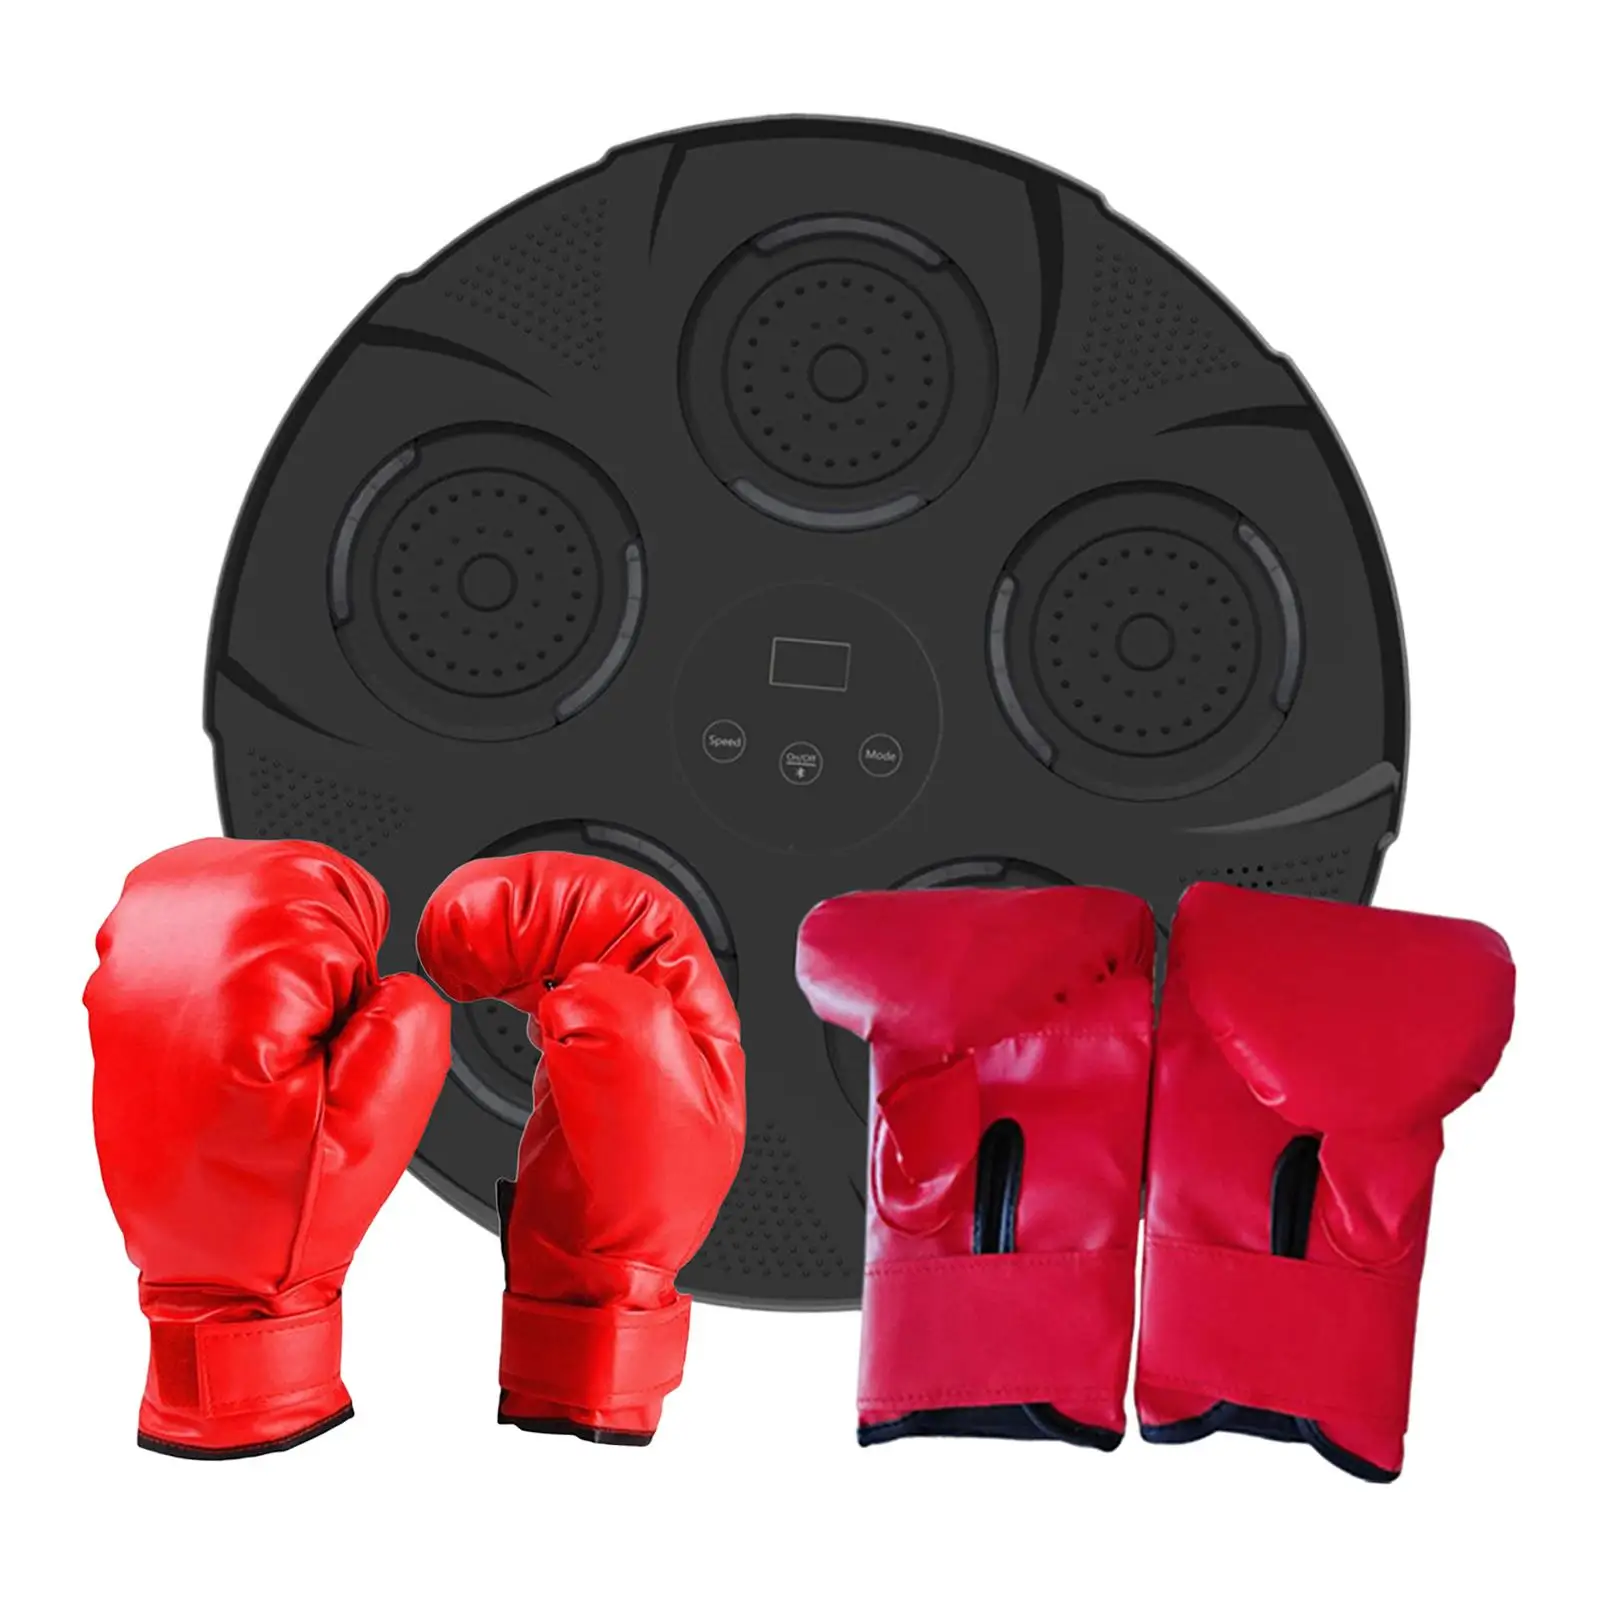 Electronic Boxing Machine Boxing Trainer Adjustable Lighted Music Boxing Wall Target for Reaction Focus Strength Training